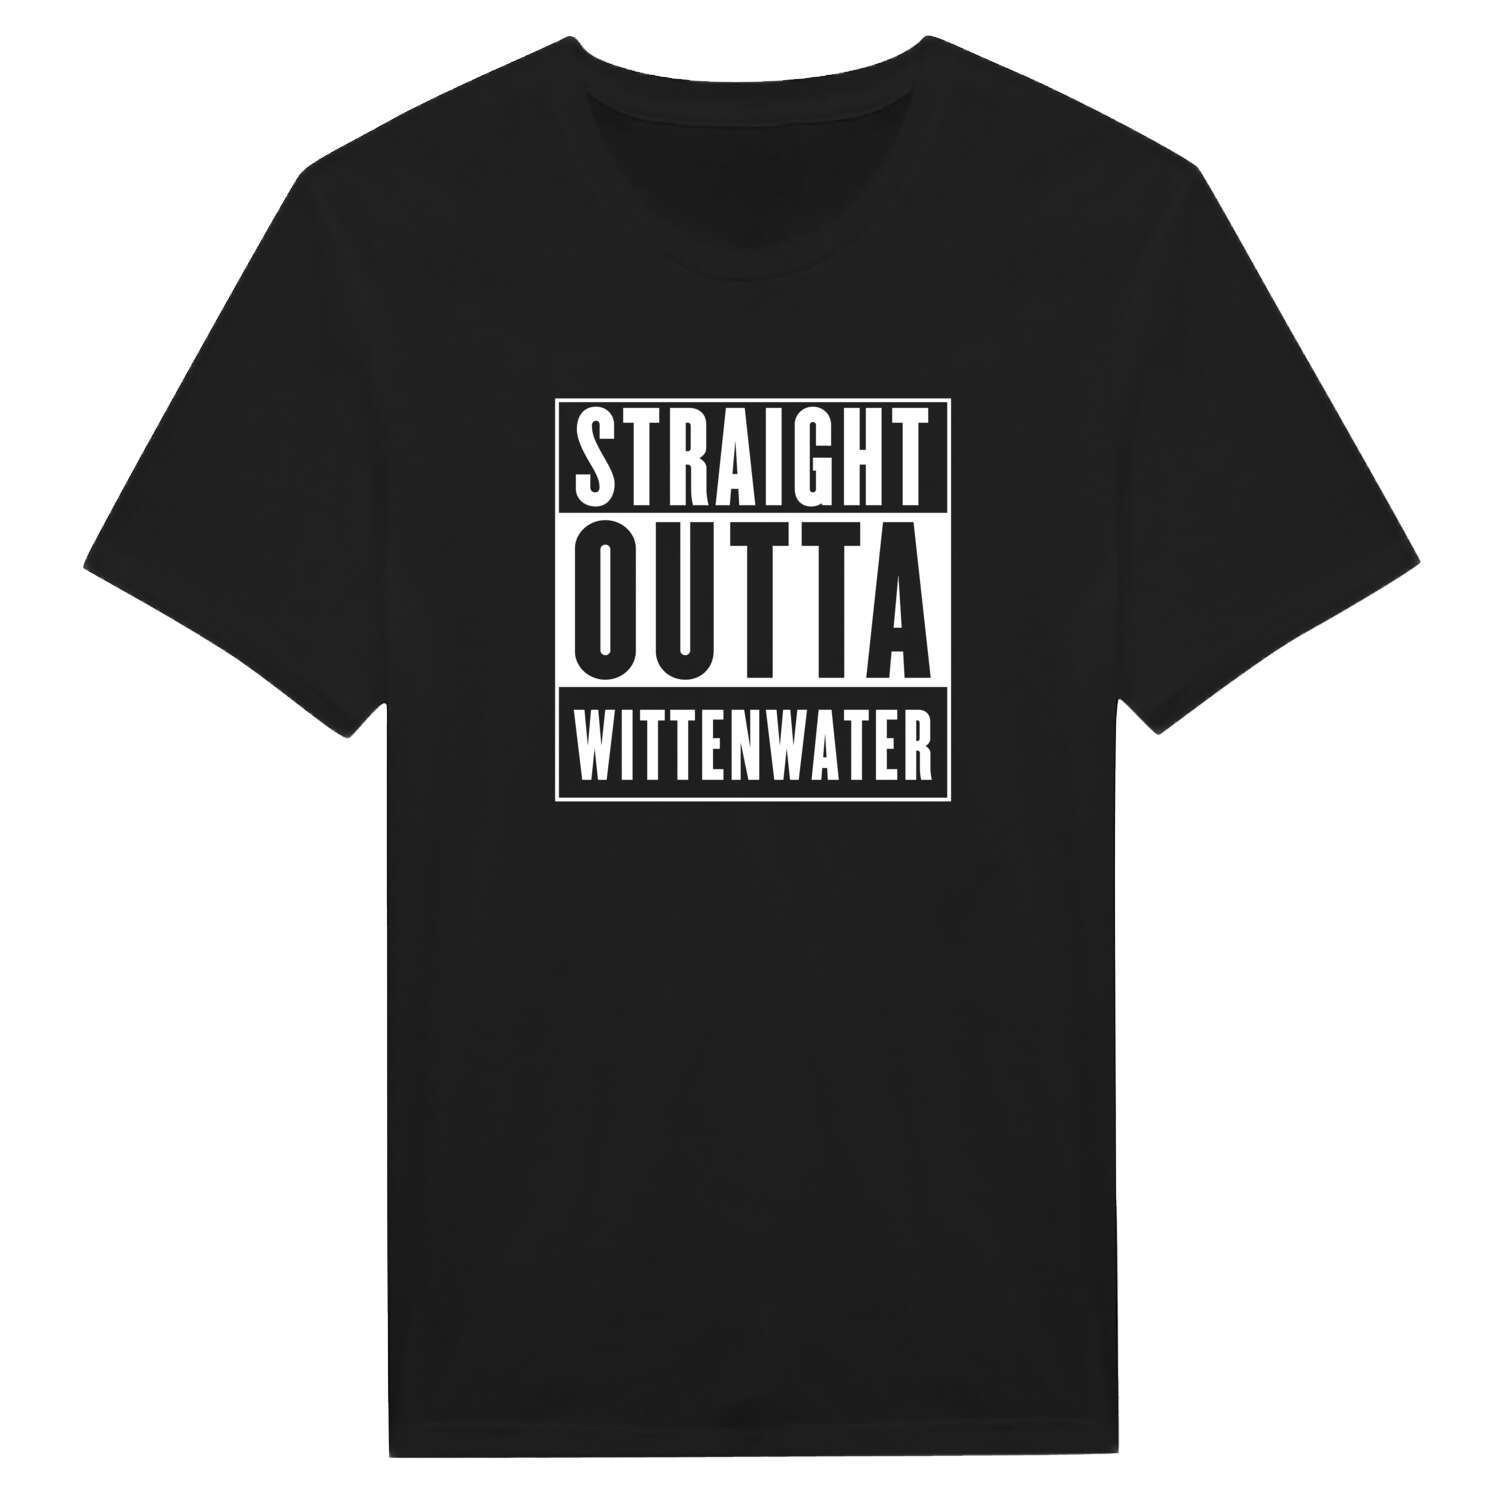 Wittenwater T-Shirt »Straight Outta«